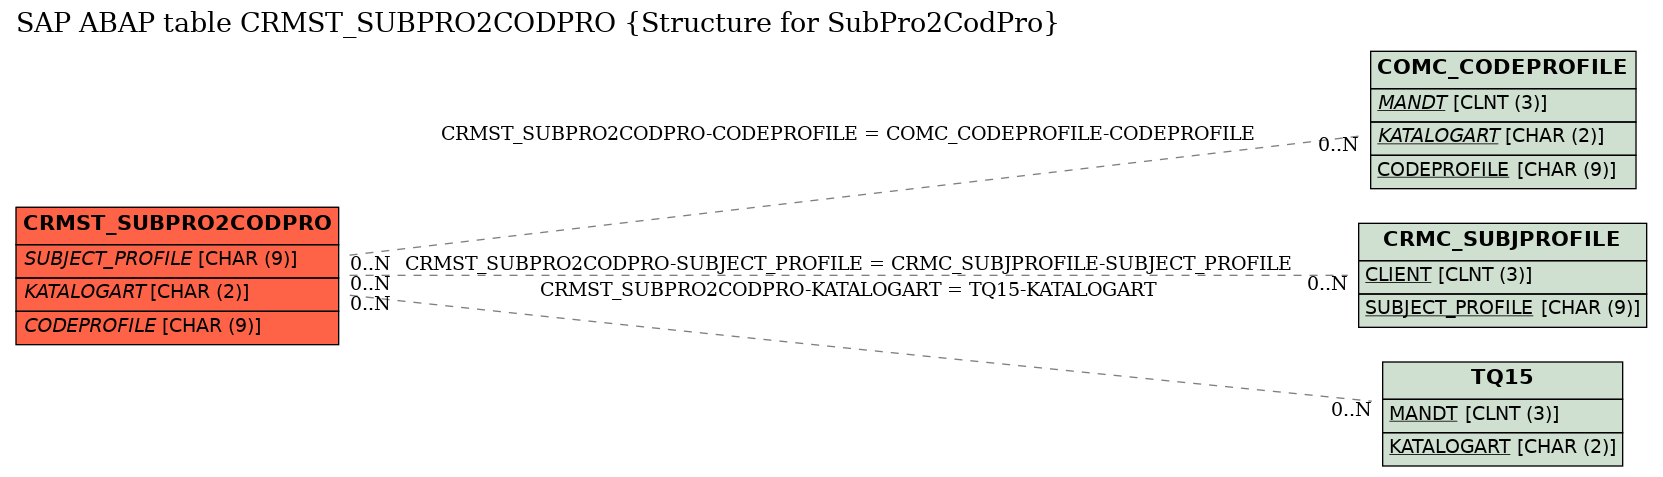 E-R Diagram for table CRMST_SUBPRO2CODPRO (Structure for SubPro2CodPro)